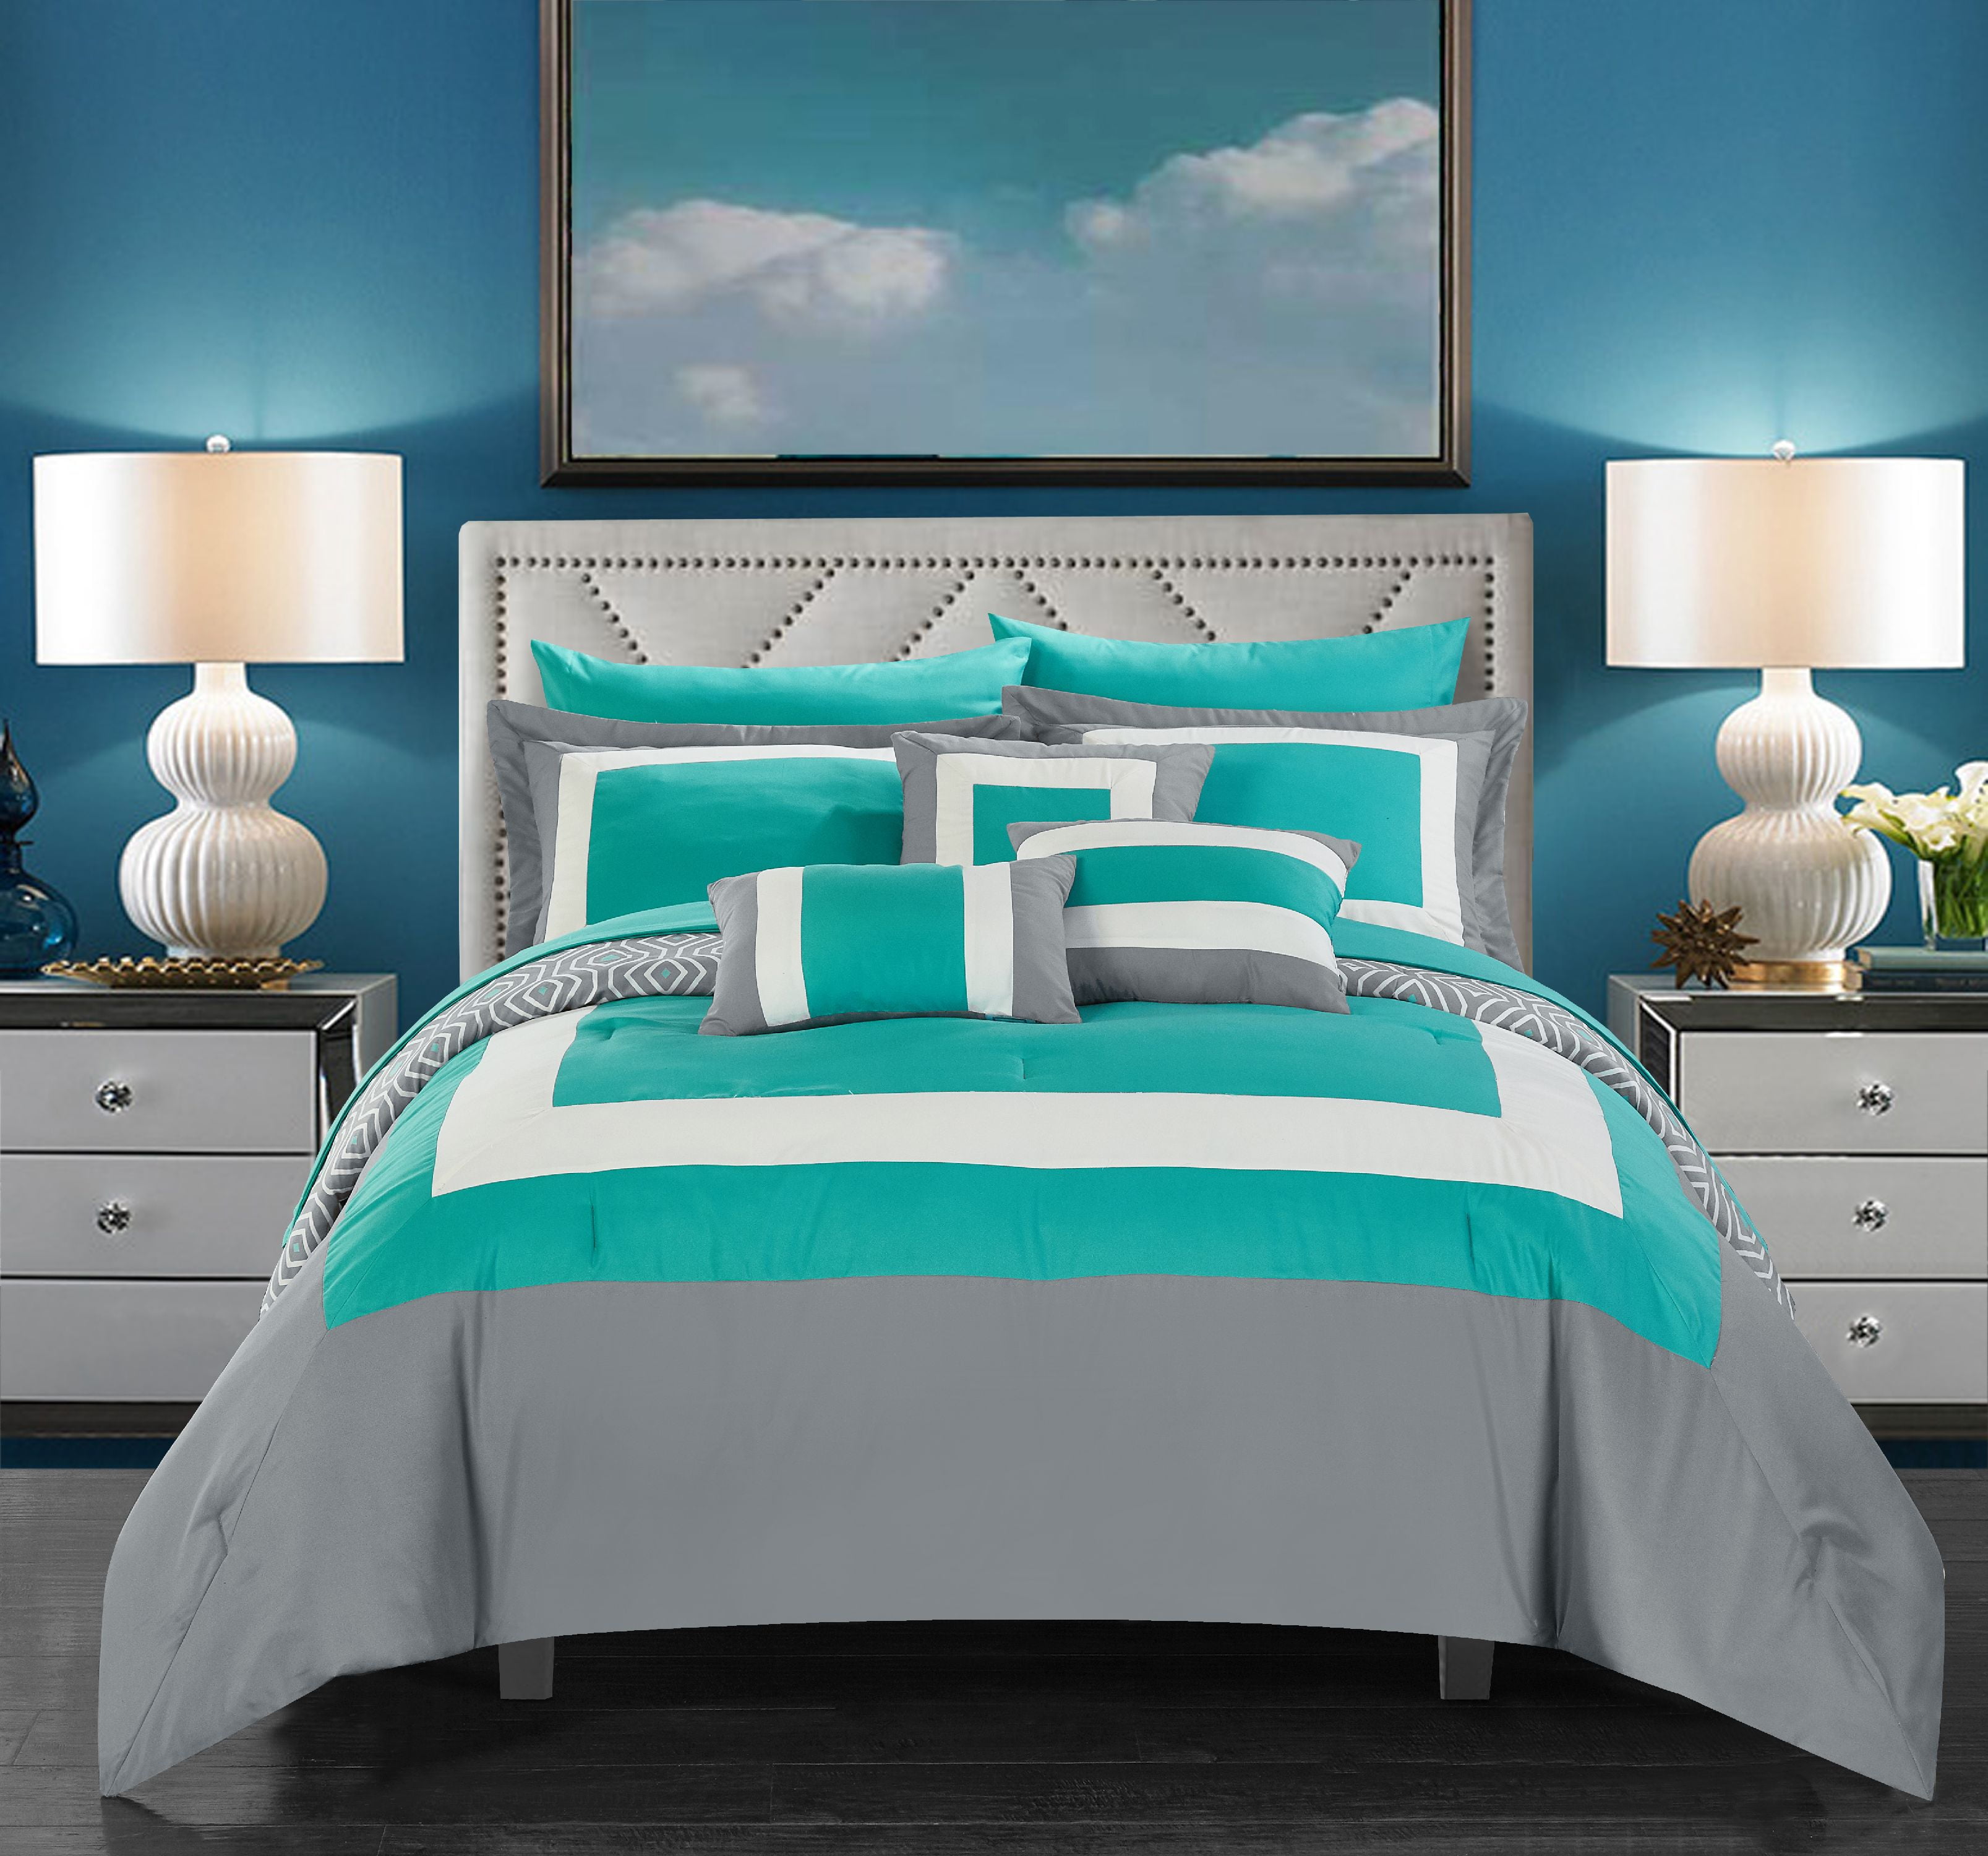 Chic Home Heldin 10 Piece Comforter Set Reversible Hotel Collection Color Block Geometric Pattern Print Design Bed In A Bag Bedding Sheets Decorative Pillows Shams Included King Turquoise Walmart Com Walmart Com,Simple Blouse Back Neck Designs Catalogue Image